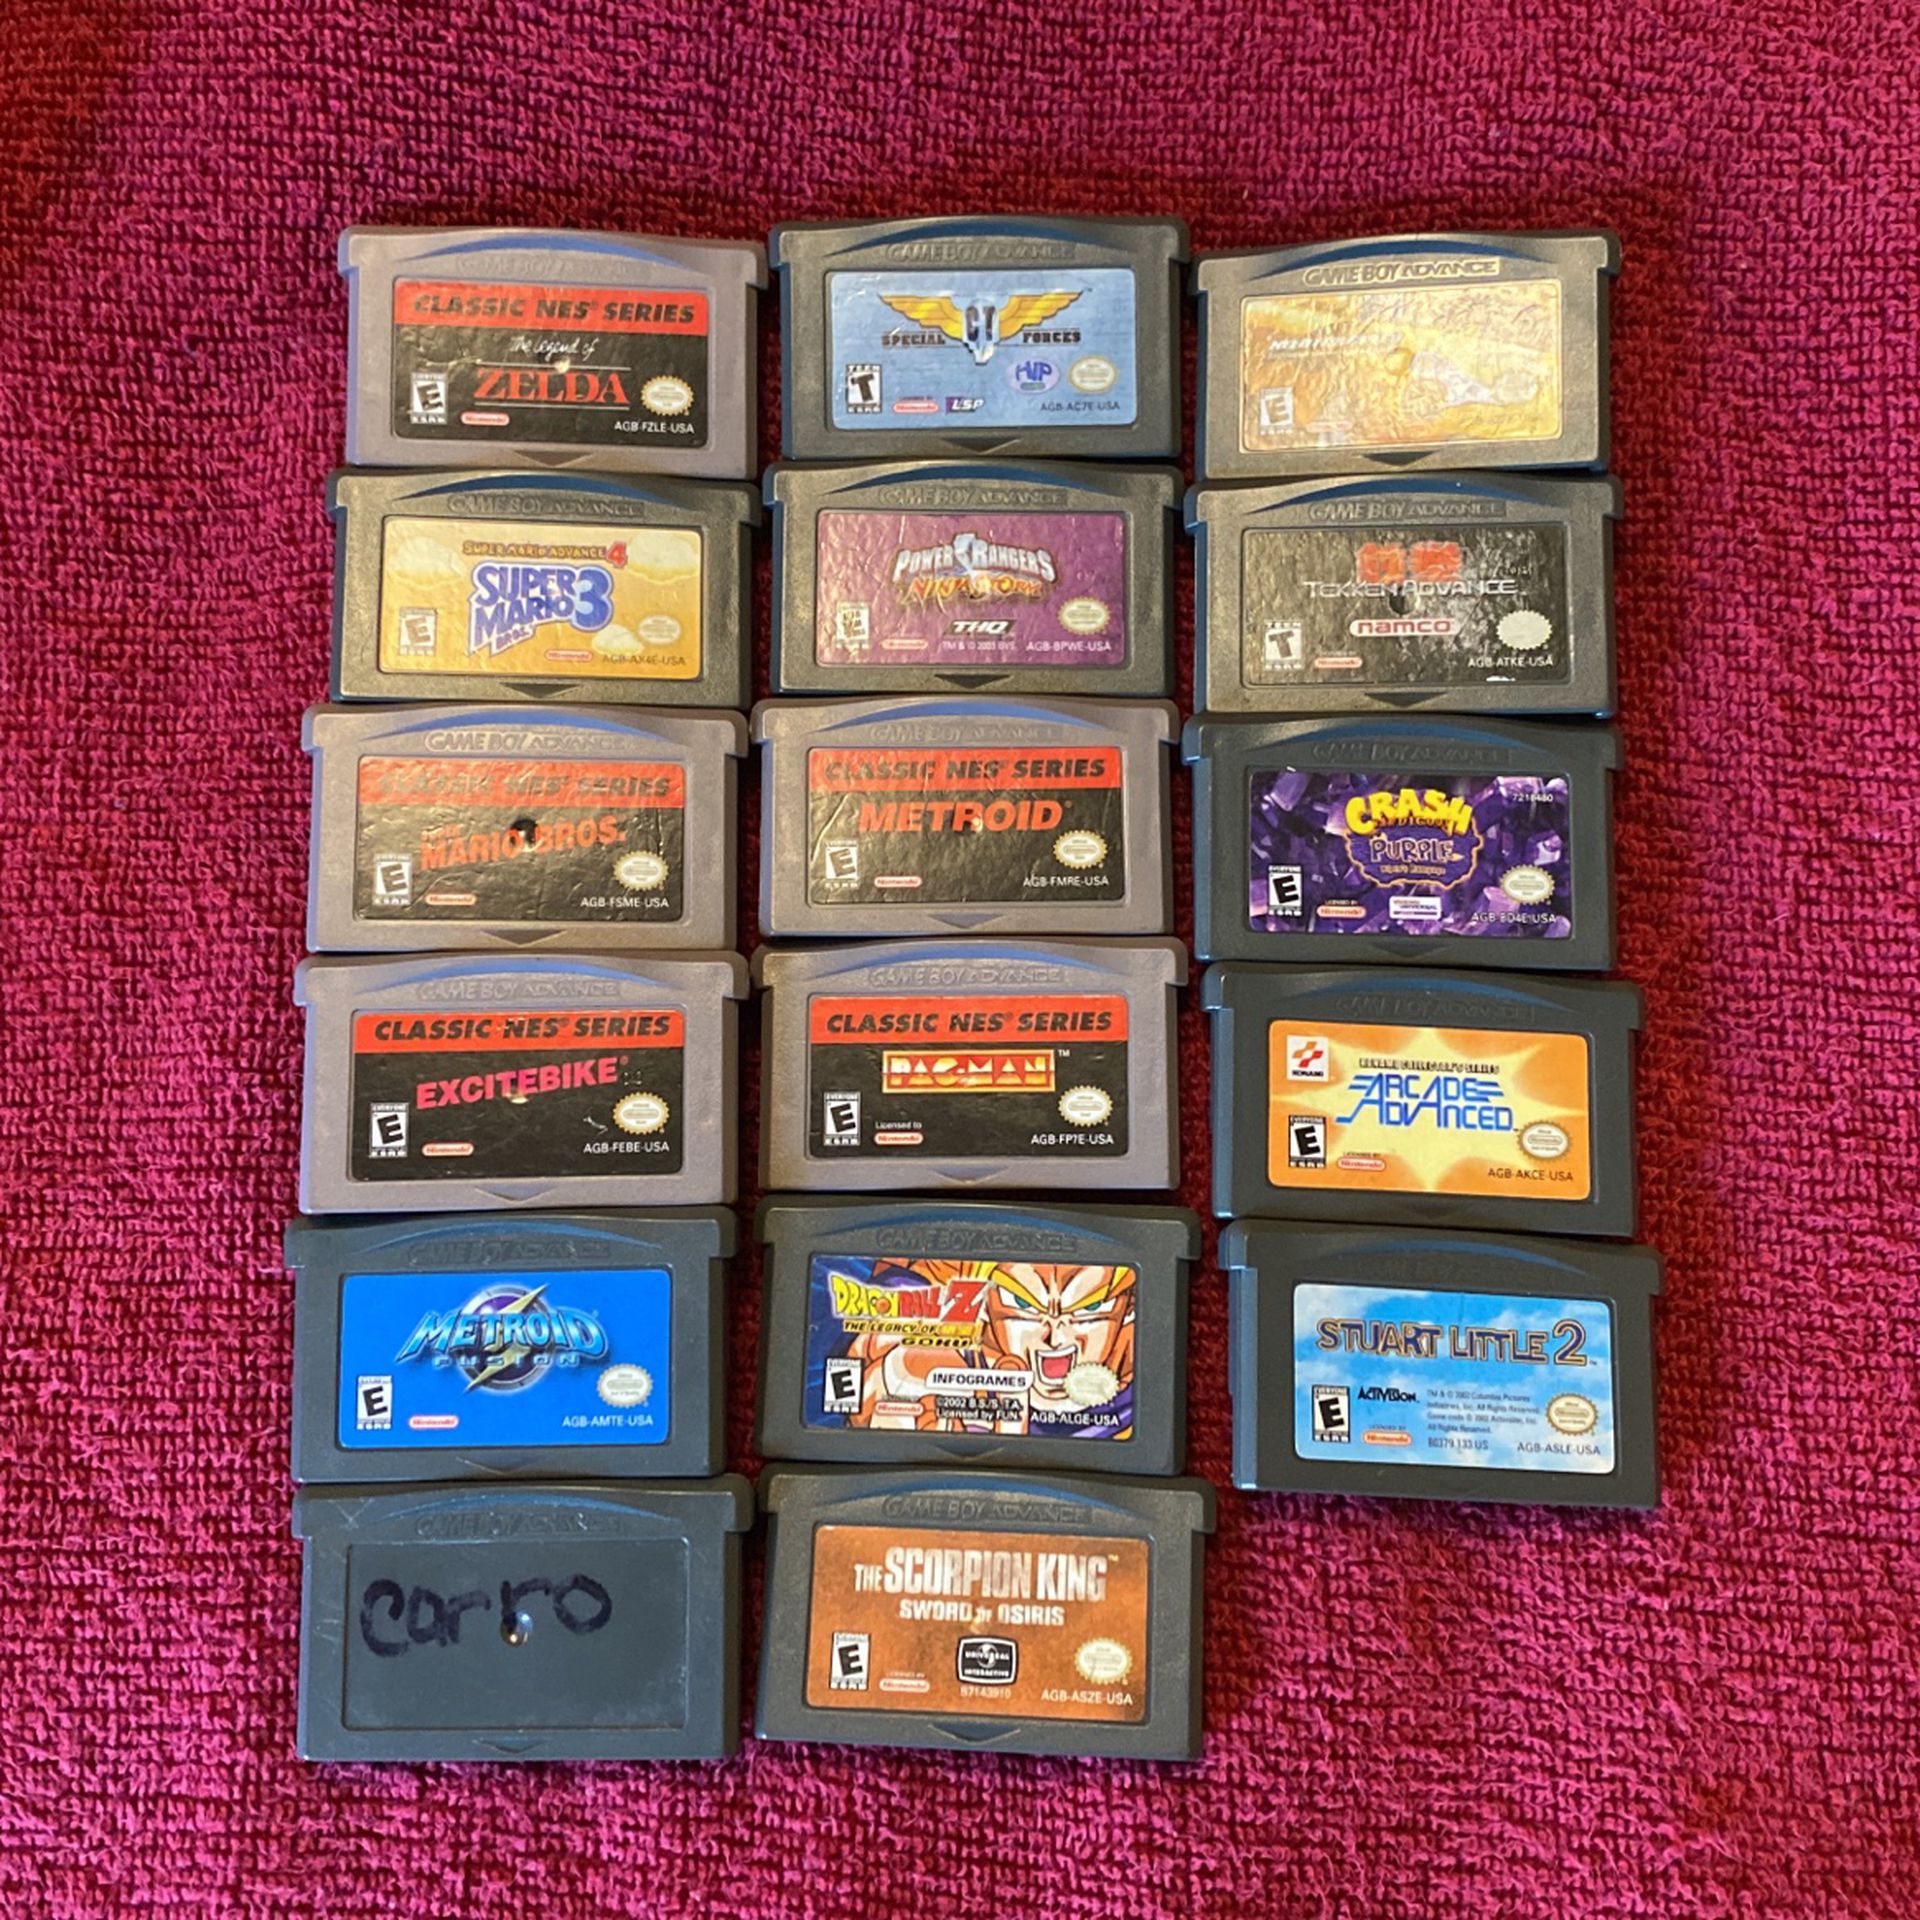 Gameboy Advance 17 Games In Good Condition $150 Obo